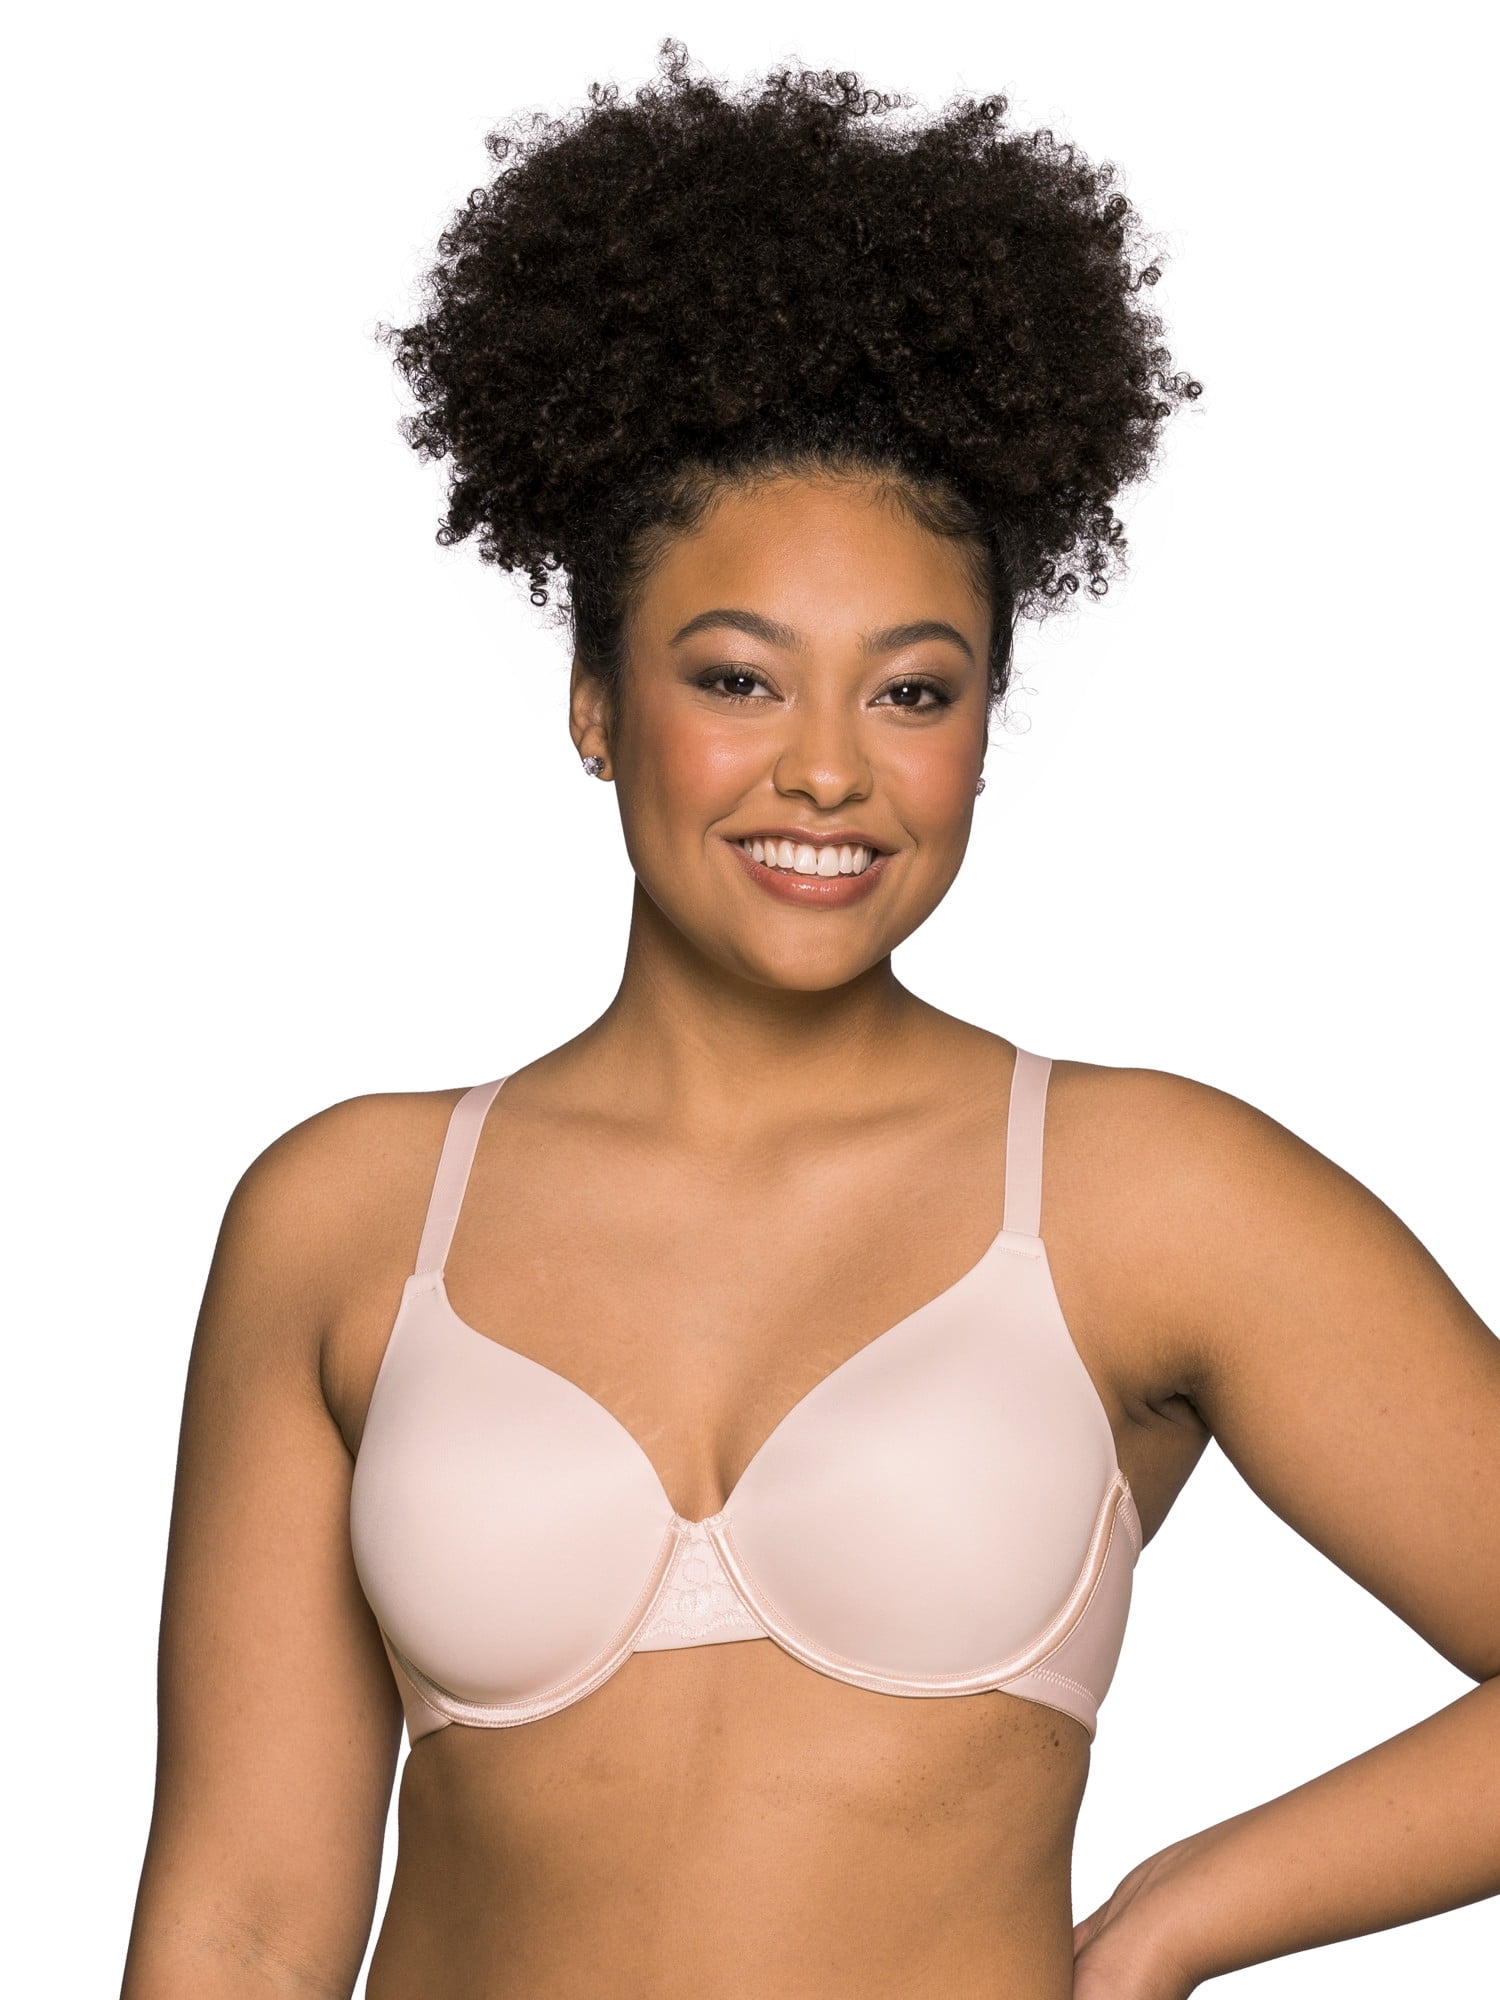 Lee & Wrangler - Your favorite Vanity Fair bras on sale for $7.99 now thru  10/31 in-store only! Select styles. Styles may vary by store.